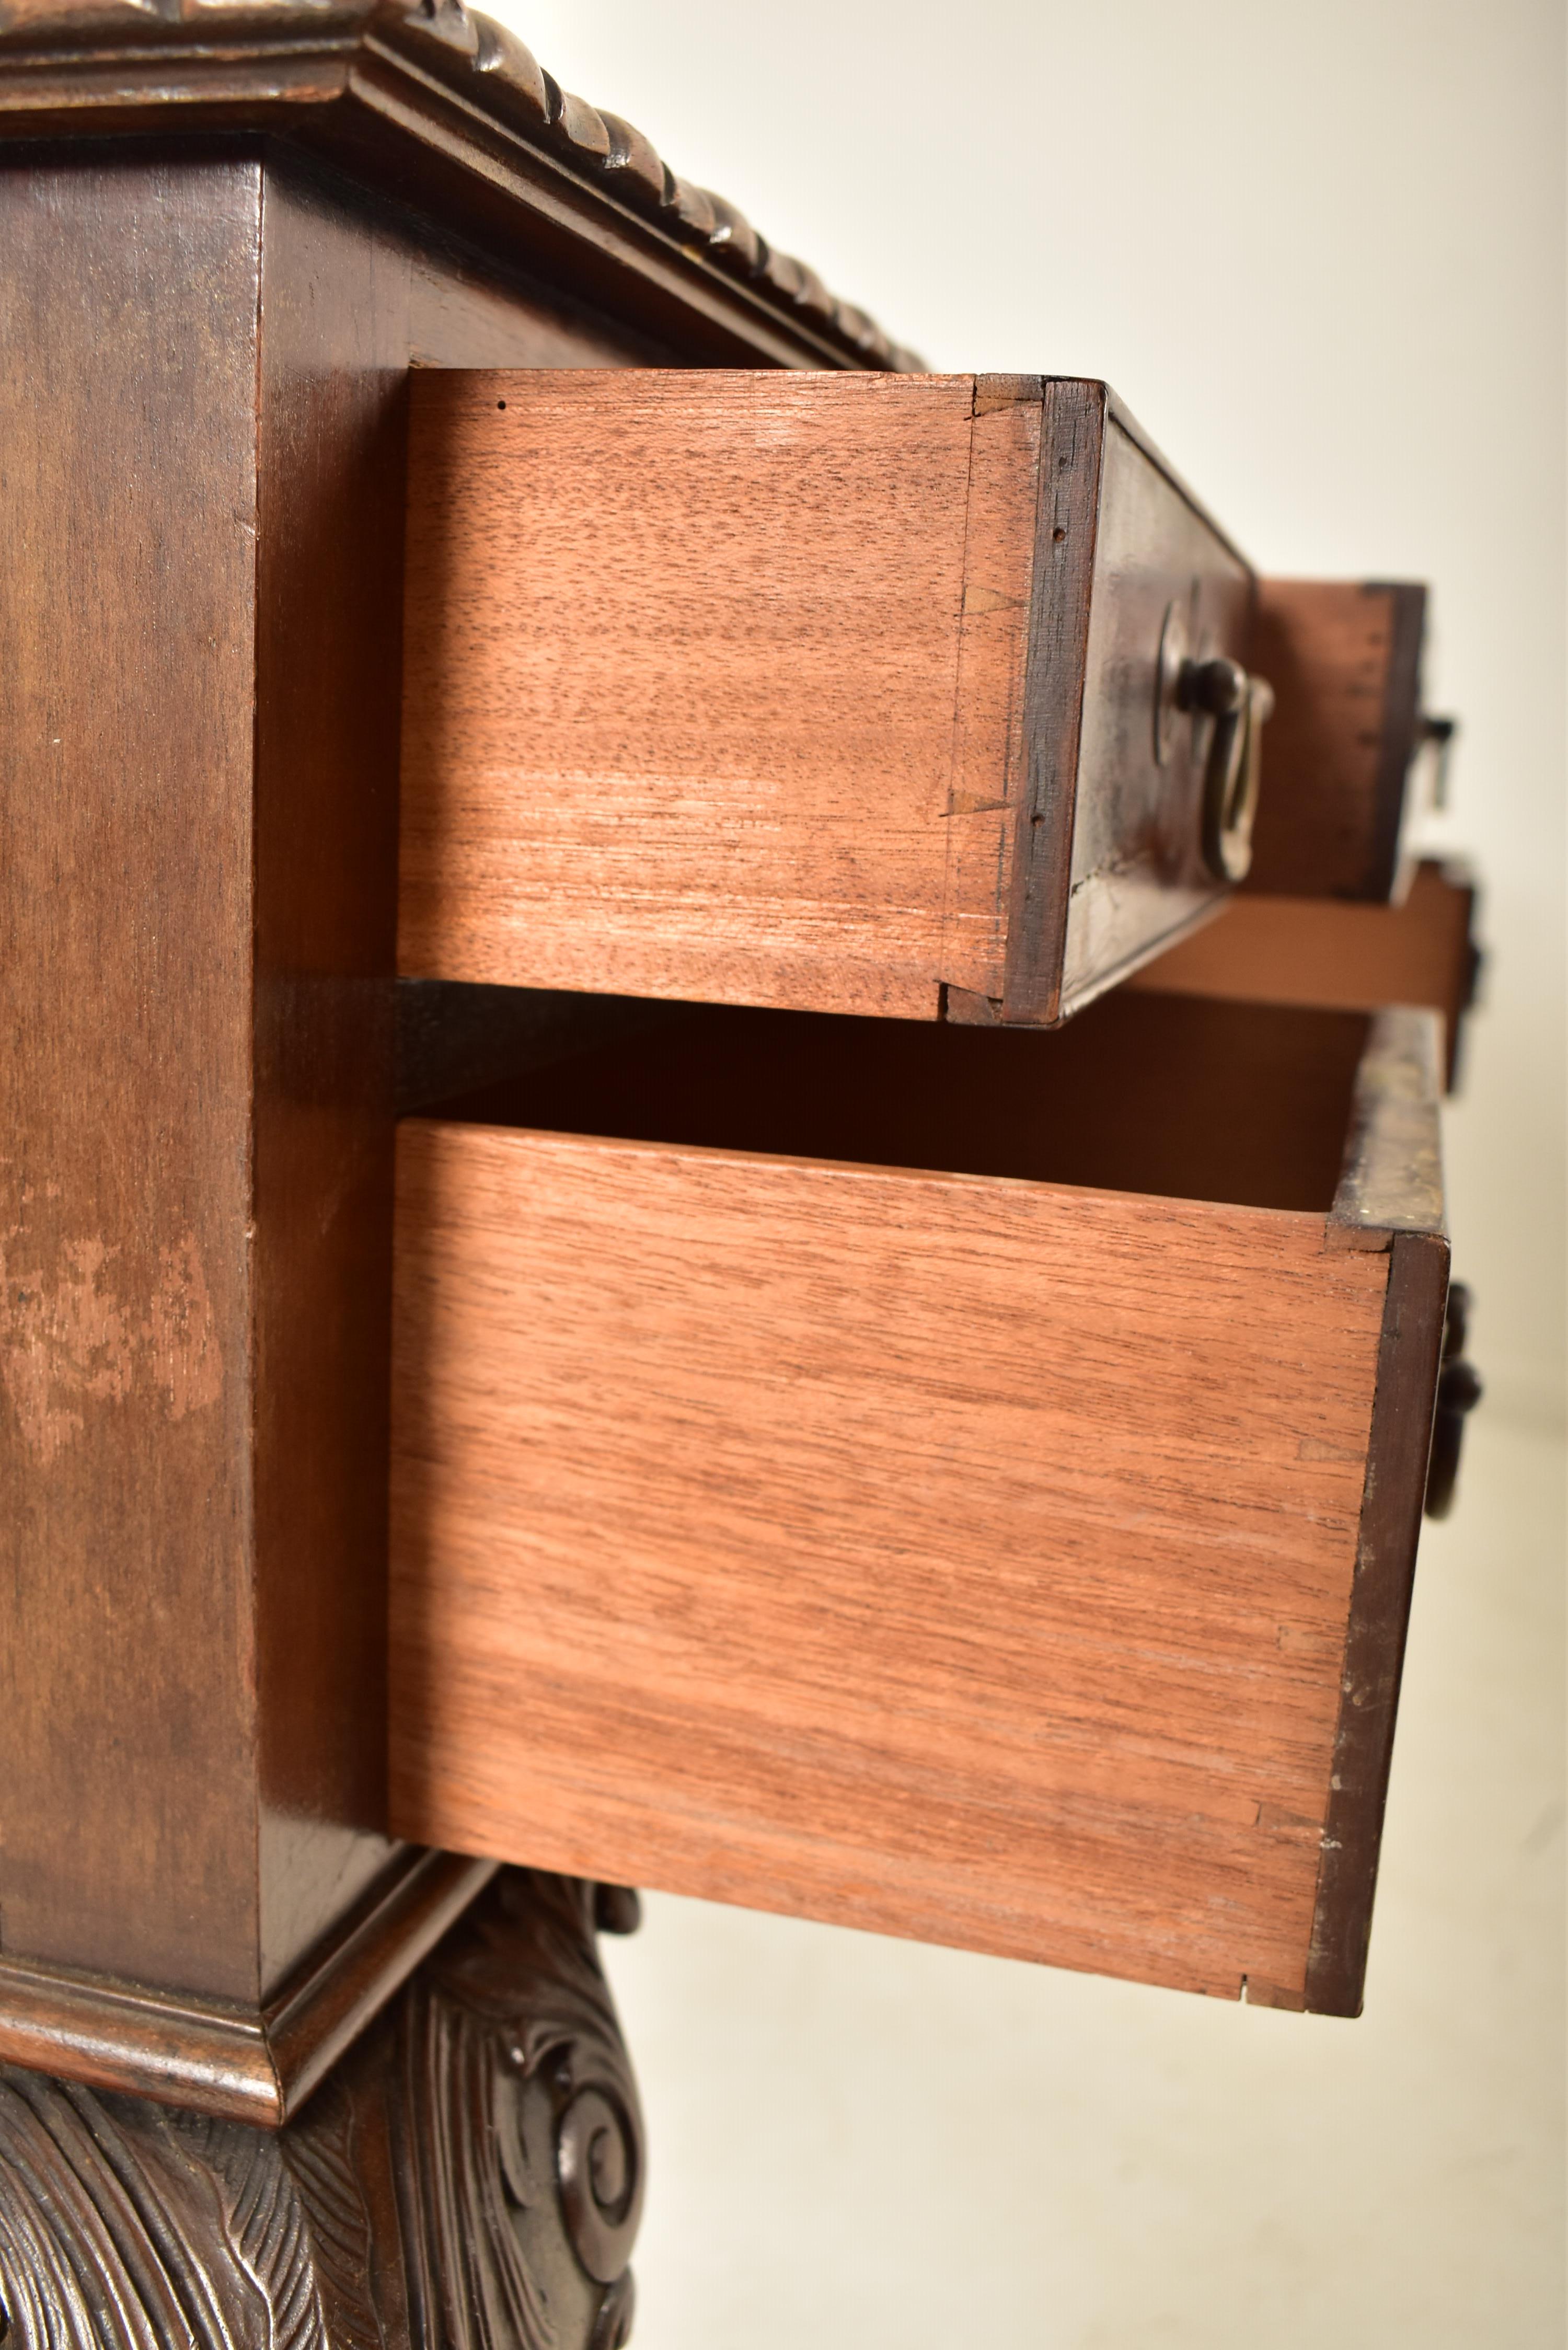 GILL & REIGATE OF LONDON - MAHOGANY PARTNERS WRITING DESK - Image 4 of 8